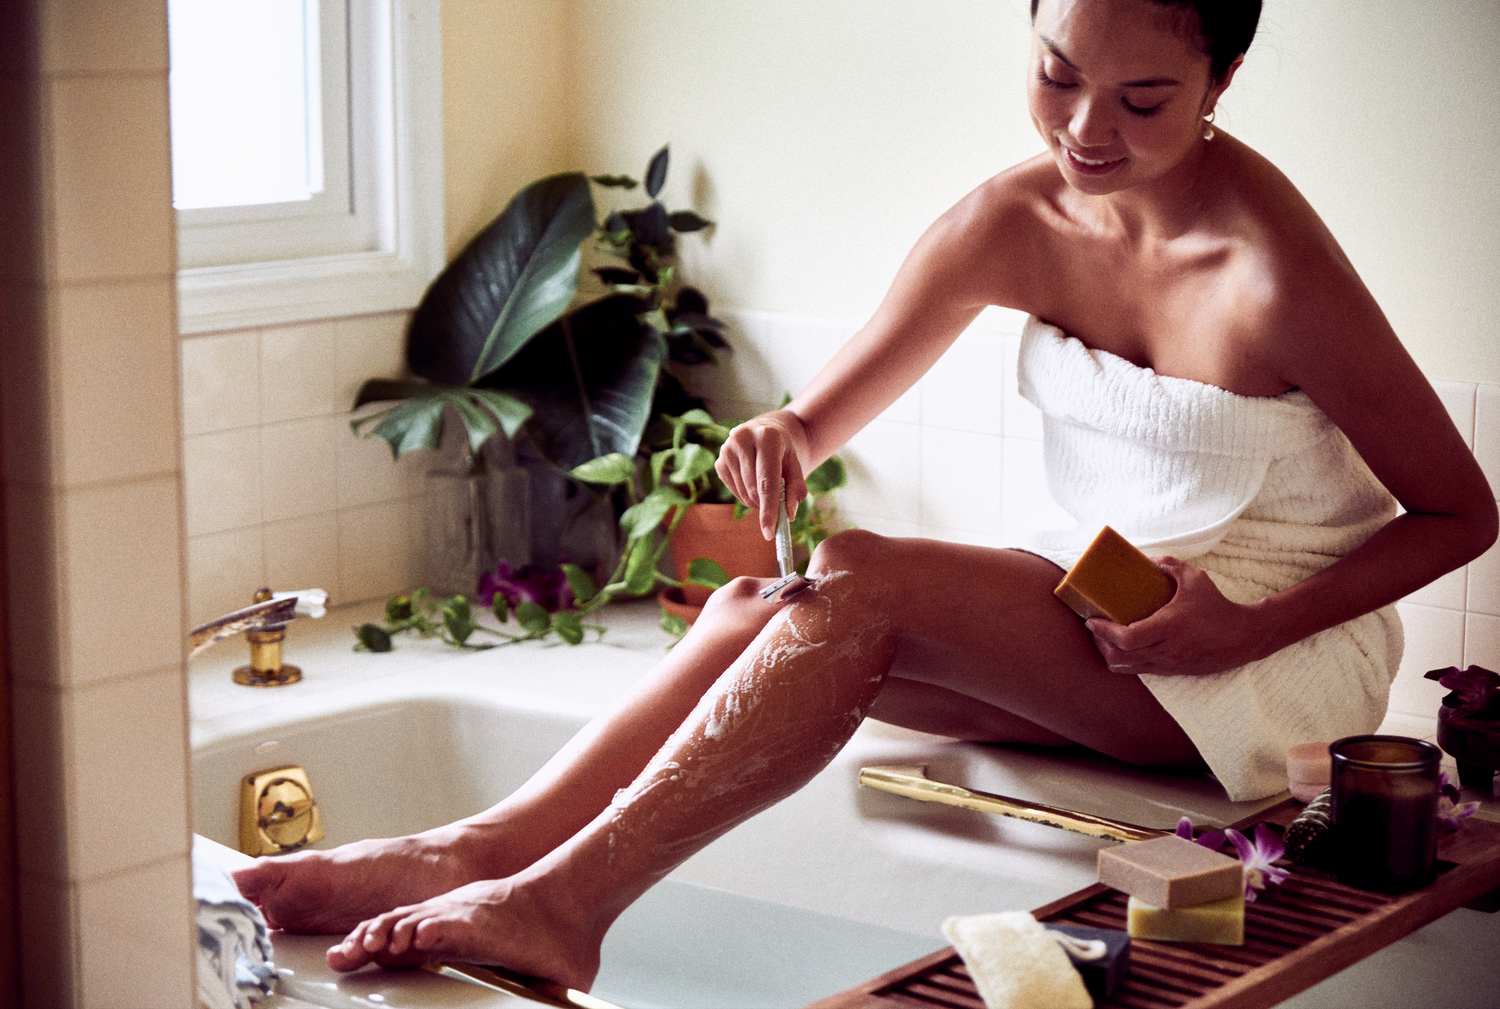 This image shows a woman sitting on a bathtub for her low waste plastic free shaving routine. She is using a metal safety razor and a solid shave soap bar. These are a part of Desesh's range of zero waste, plastic free, eco friendly, more sustainable personal care and everyday essential products.